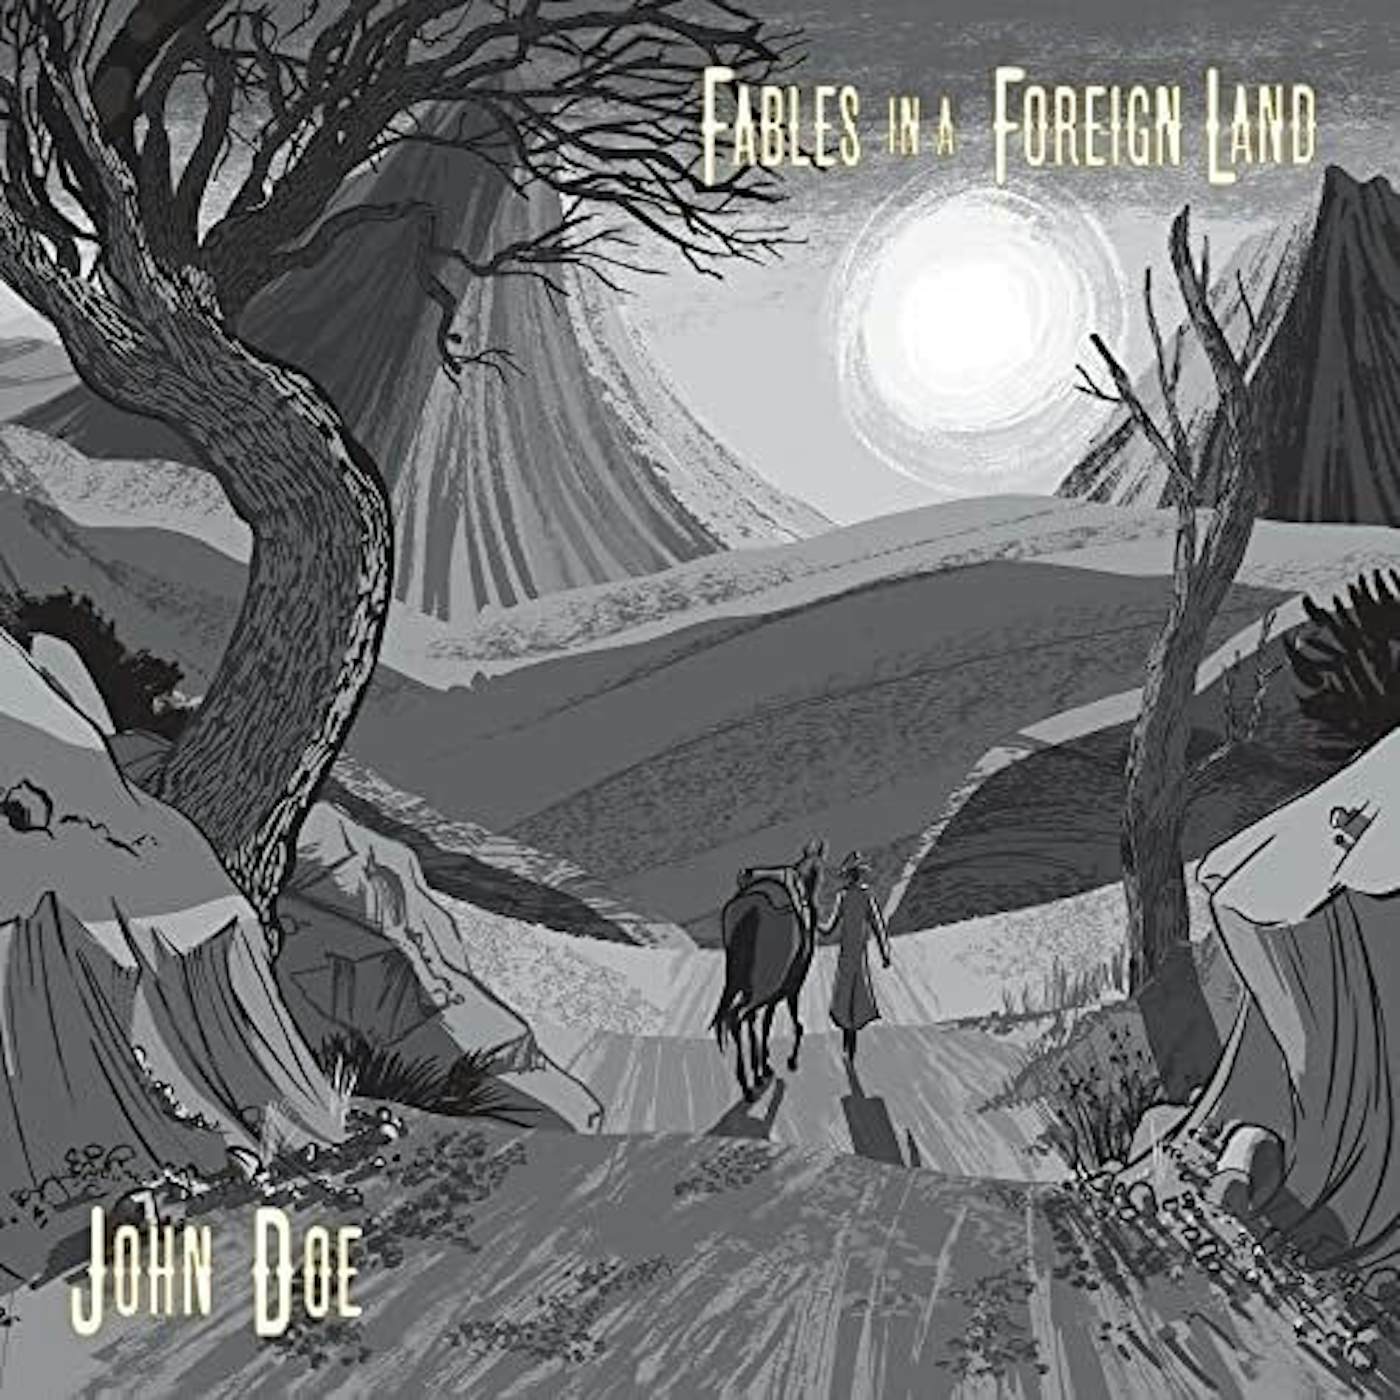 John Doe FABLES IN A FOREIGN LAND CD